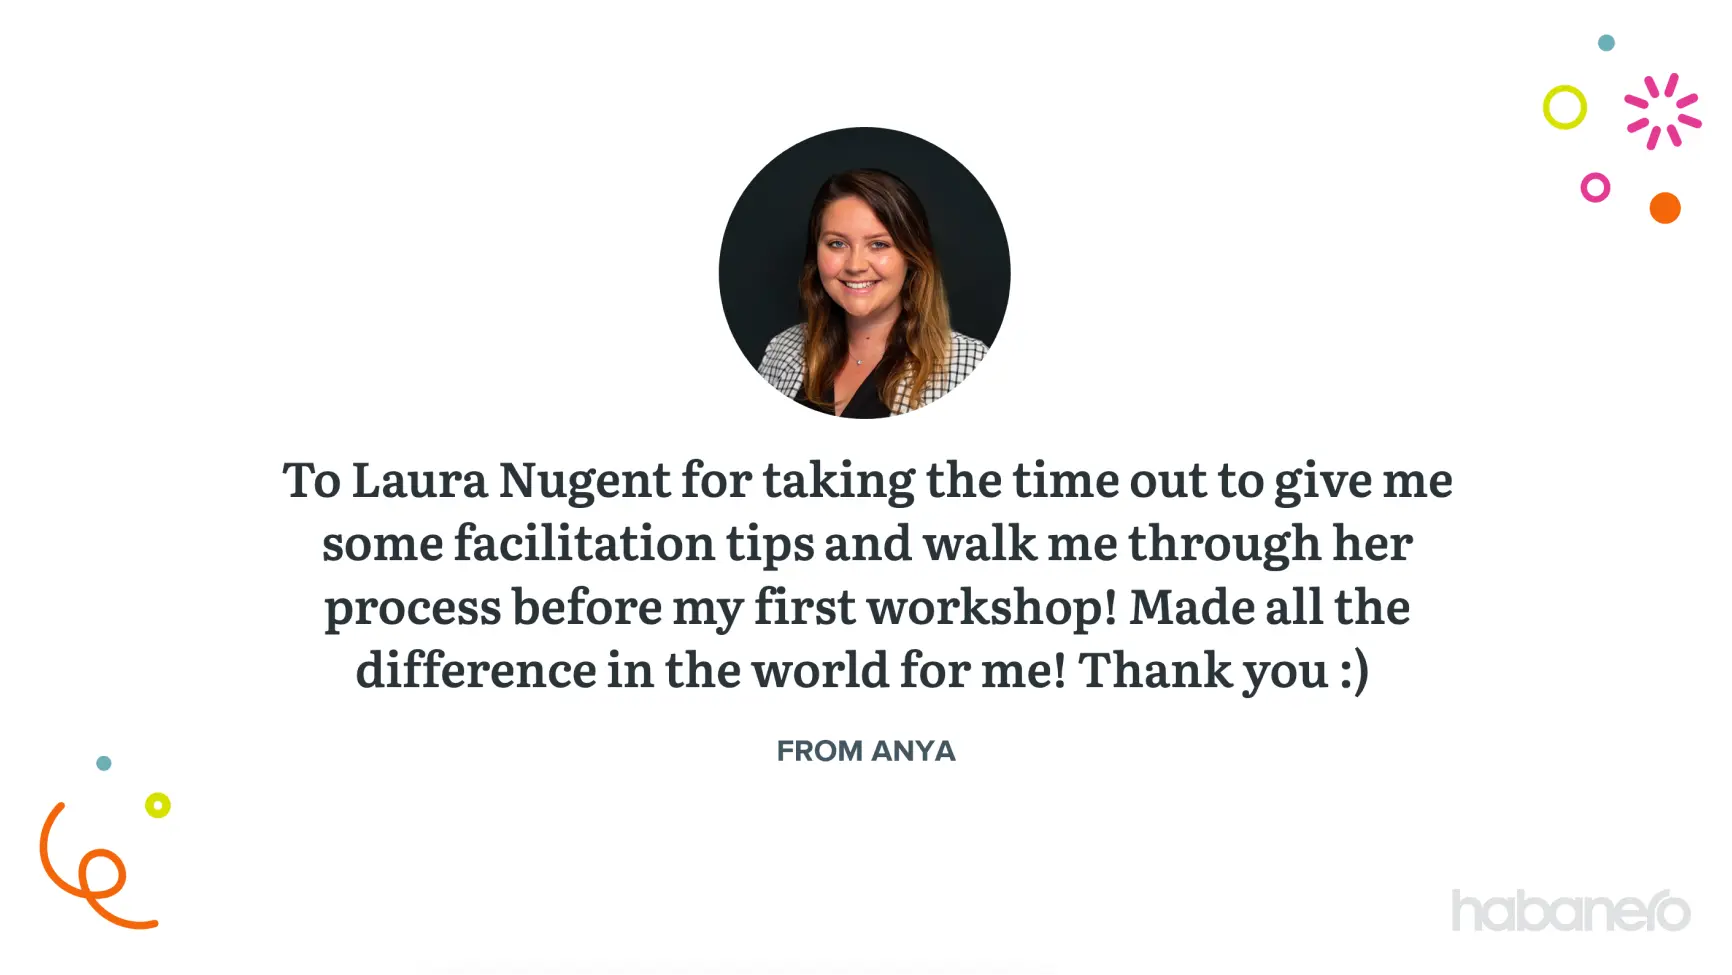 Image of a slide from Habanero's PowerPoint deck. It shows Laura Nugent being recognized by Anya for her facilitation tips.